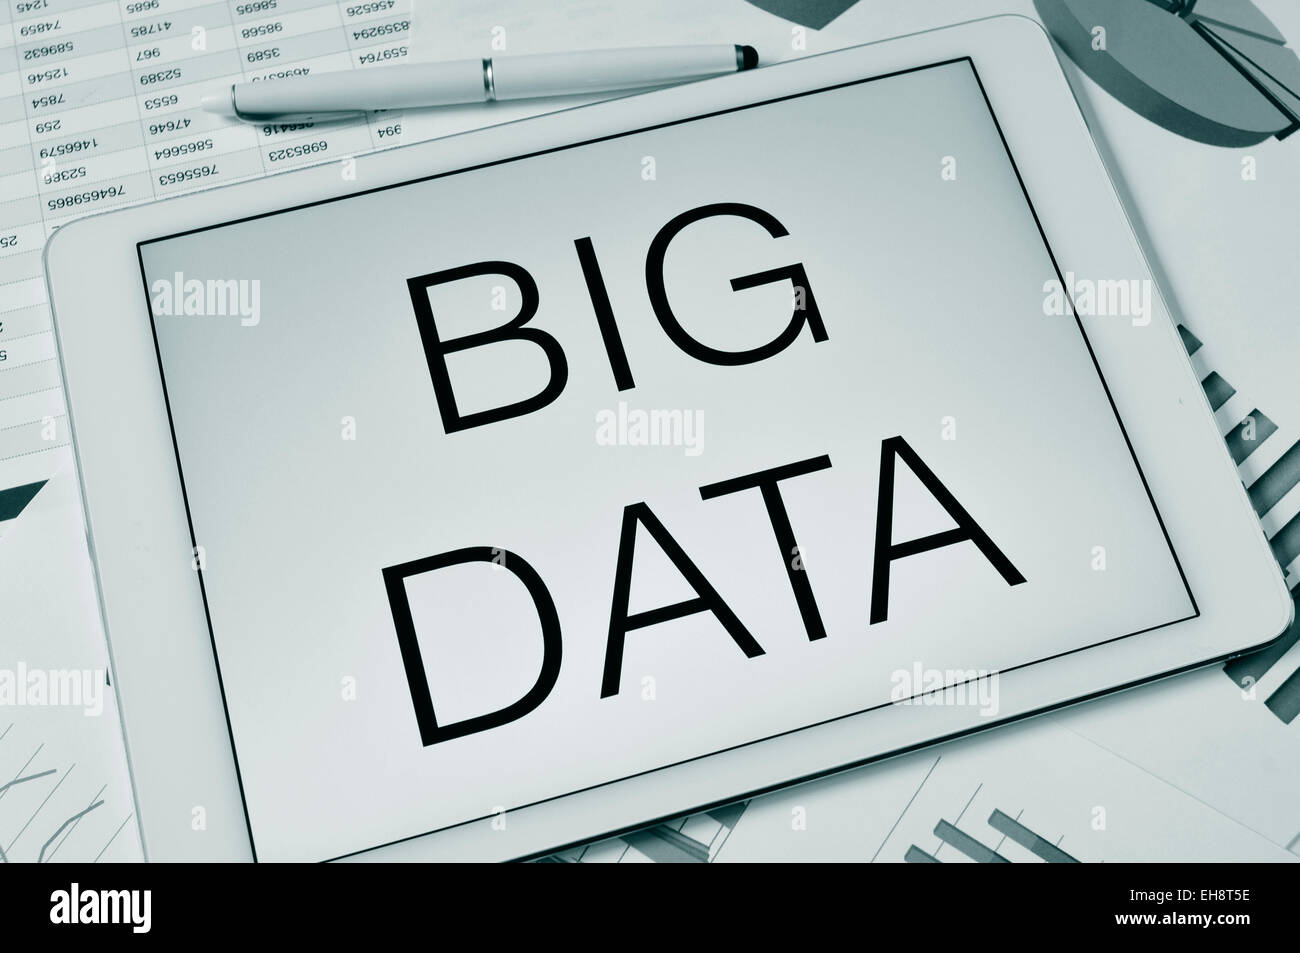 the text big data in the screen of a tablet on a table with charts and spreadsheet, in black and white Stock Photo